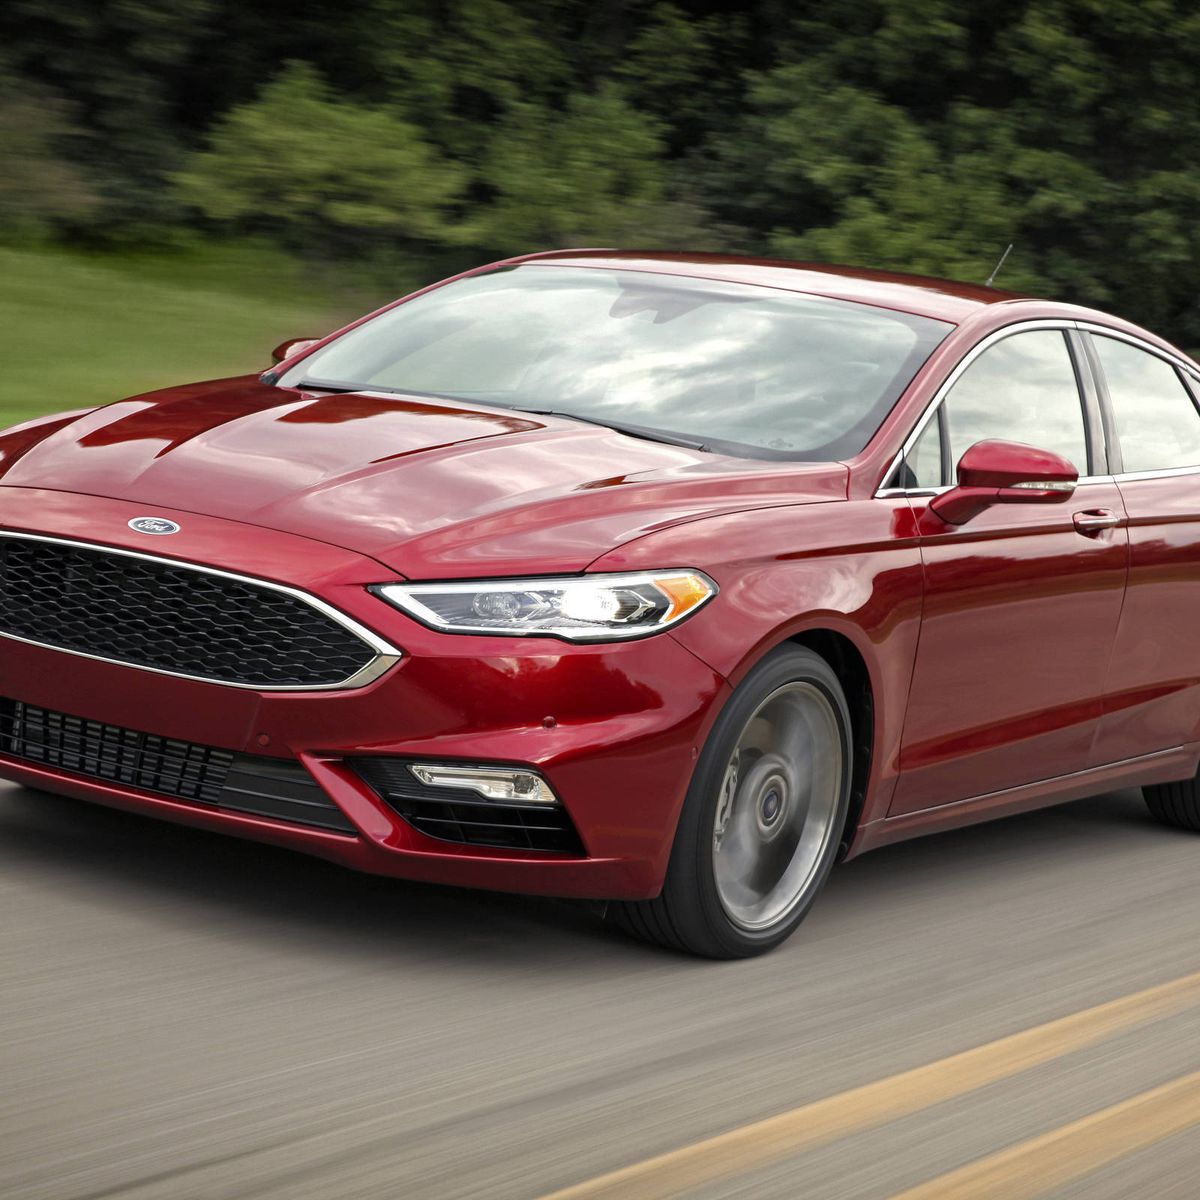 2017 Ford Fusion Sport first drive: A fitting name